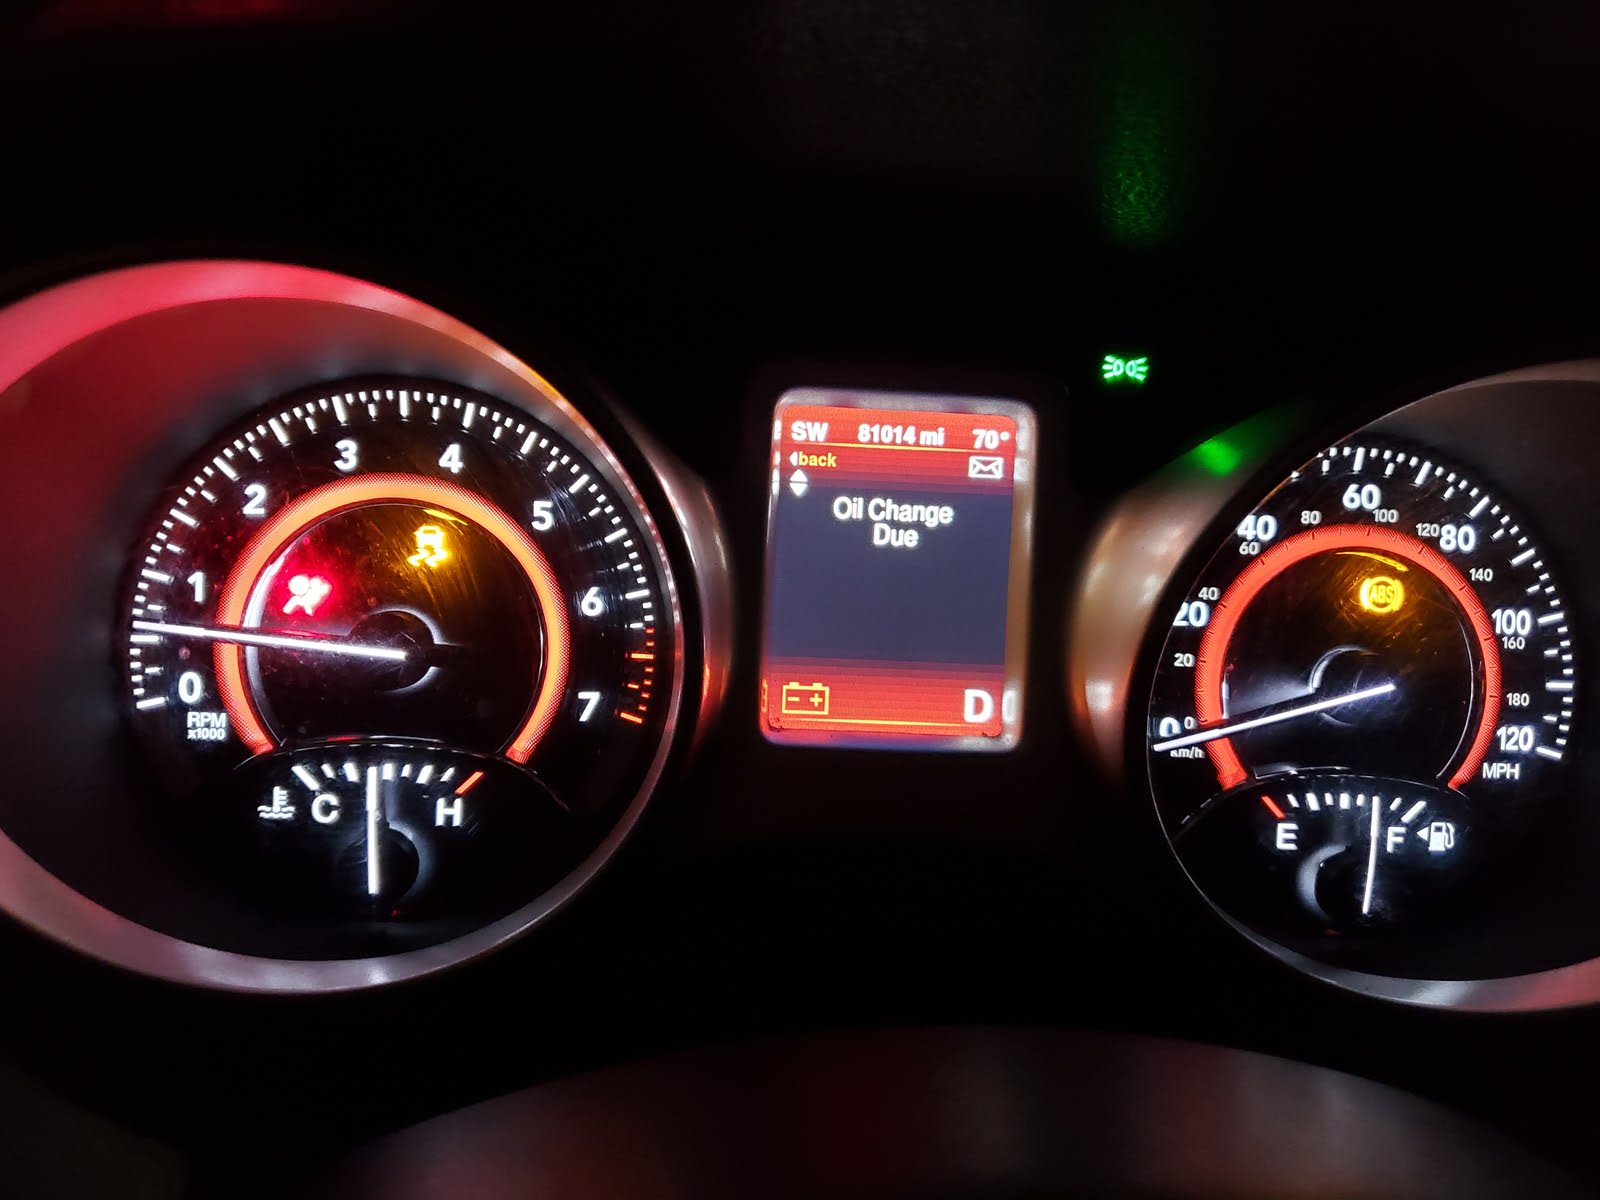 2013 dodge journey battery saver mode while driving